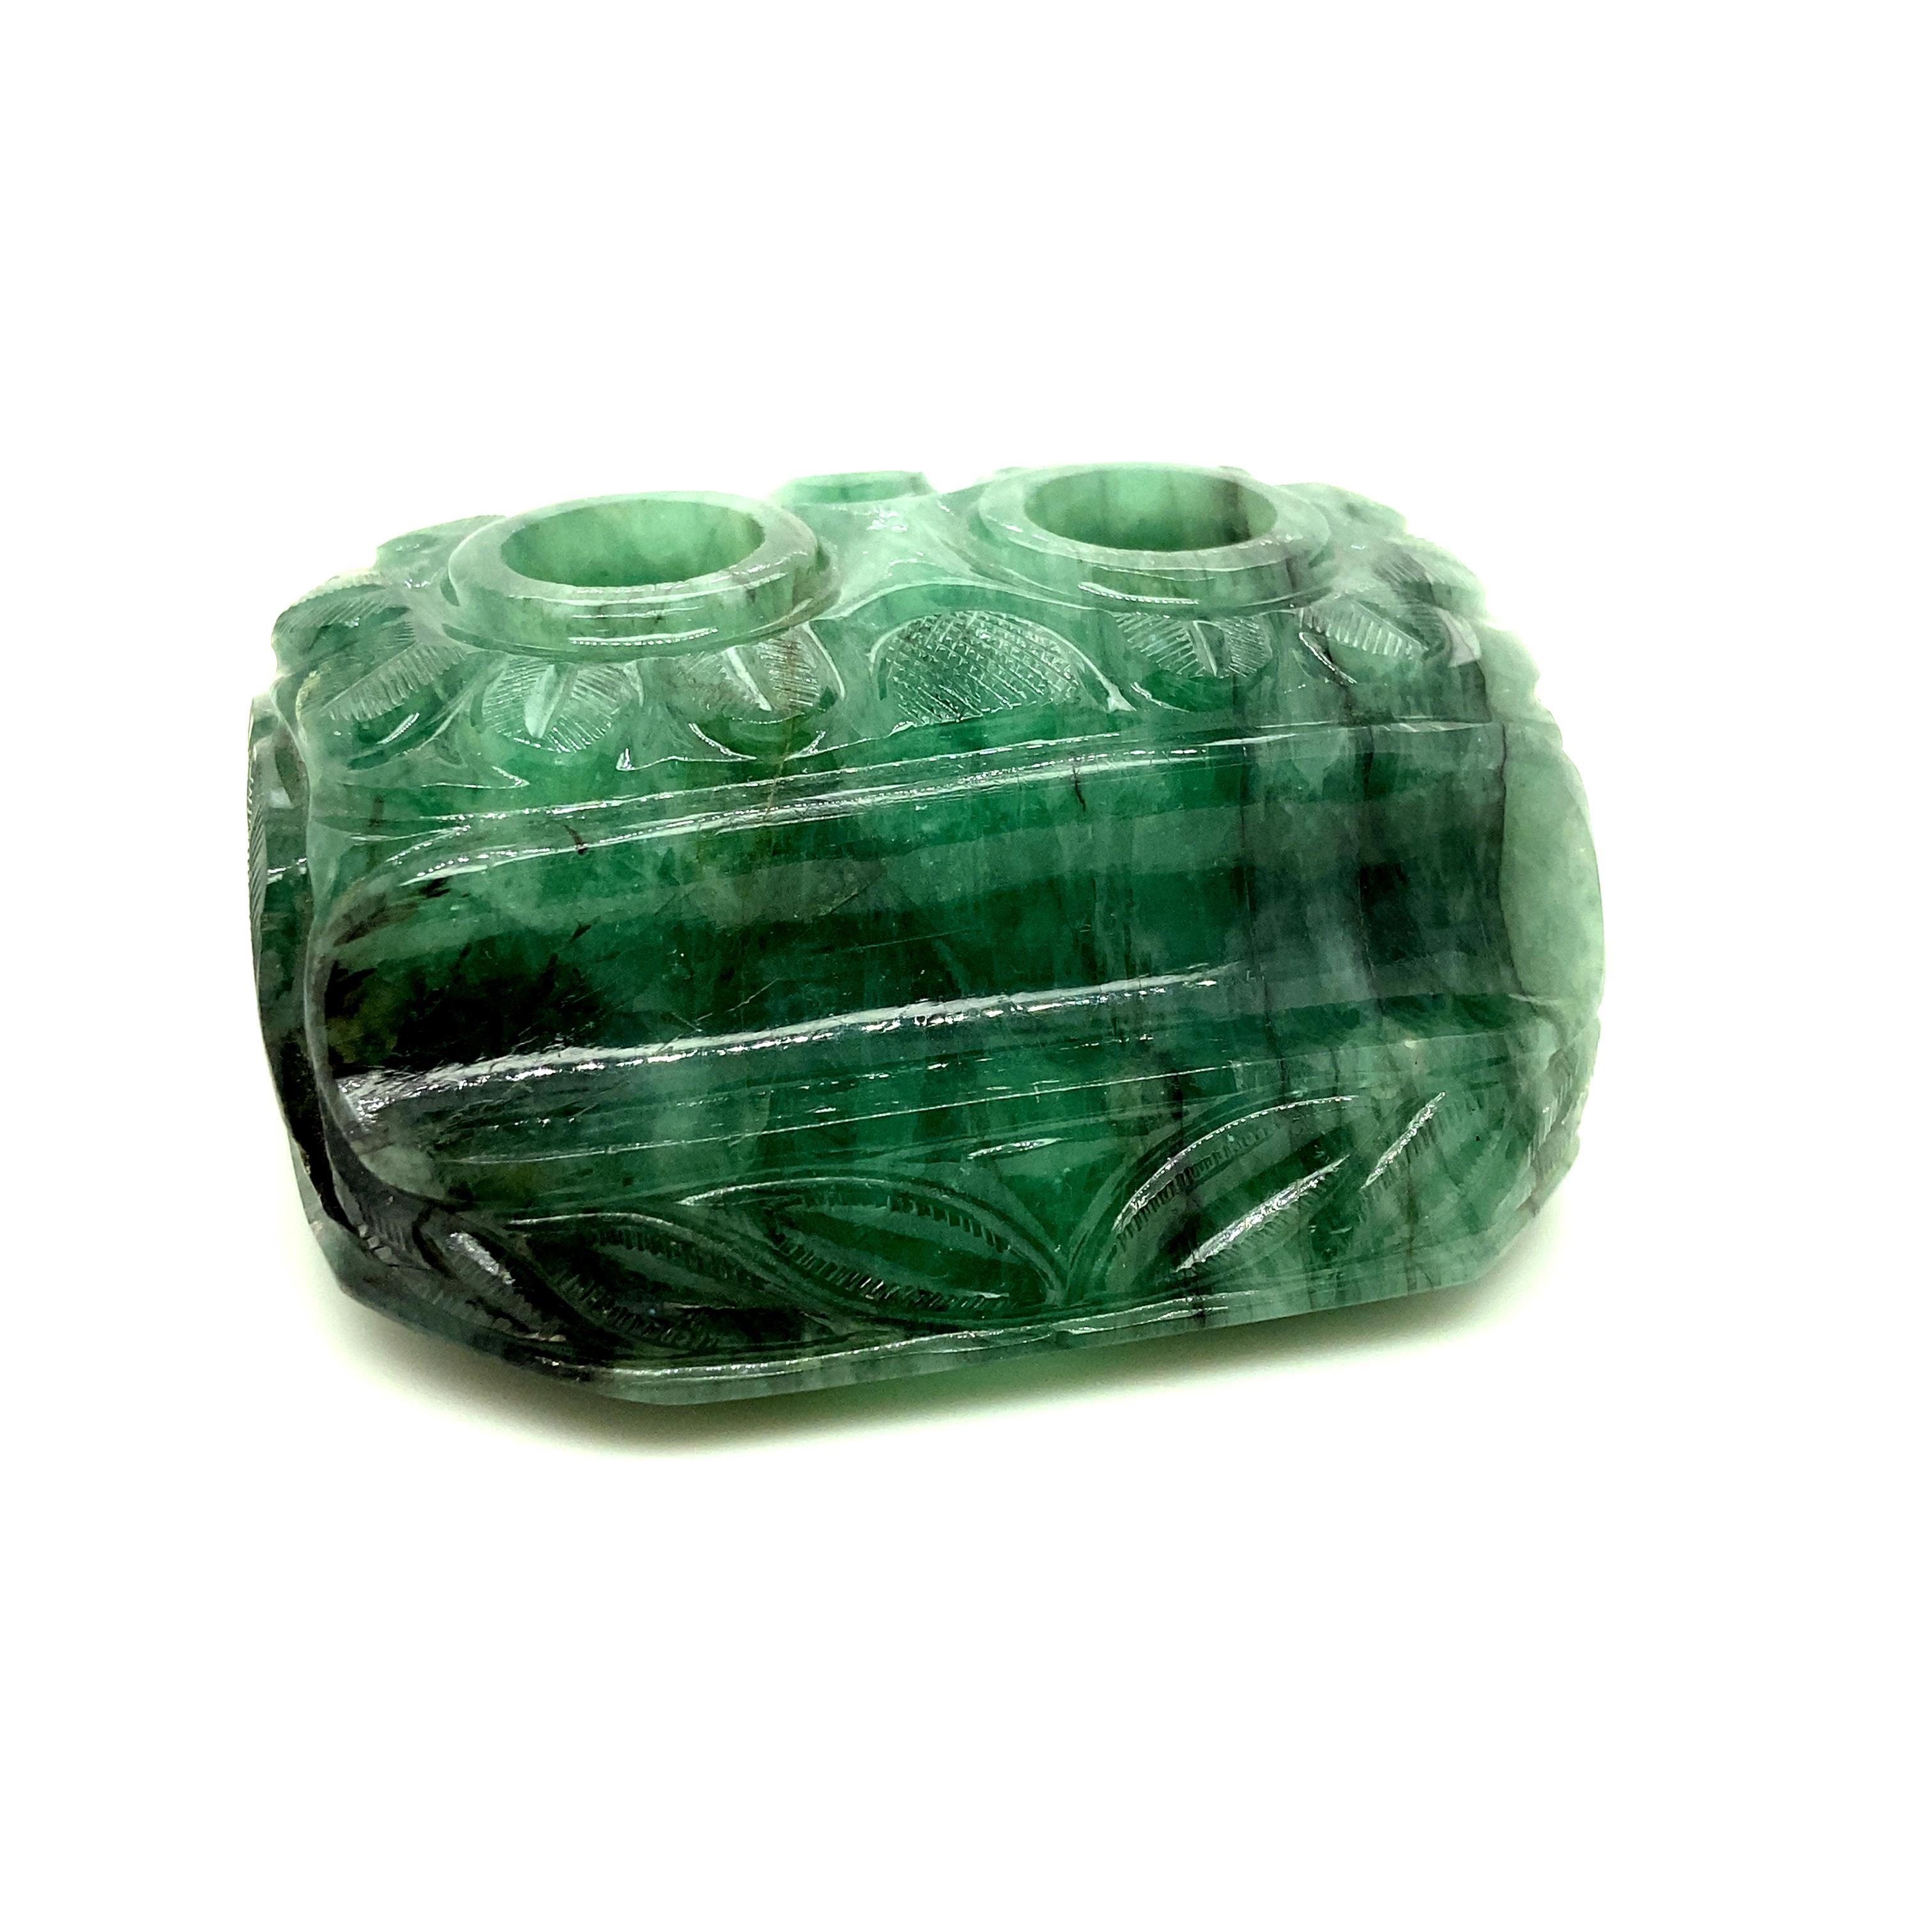 1191 Carat Carved Emerald Pen Holder: 

An incredibly rare and fascinating piece, it is an antique carved emerald pen holder weighing an enormous 1191 carats in total. This is truly a one of a kind carved emerald piece. The emerald is completely